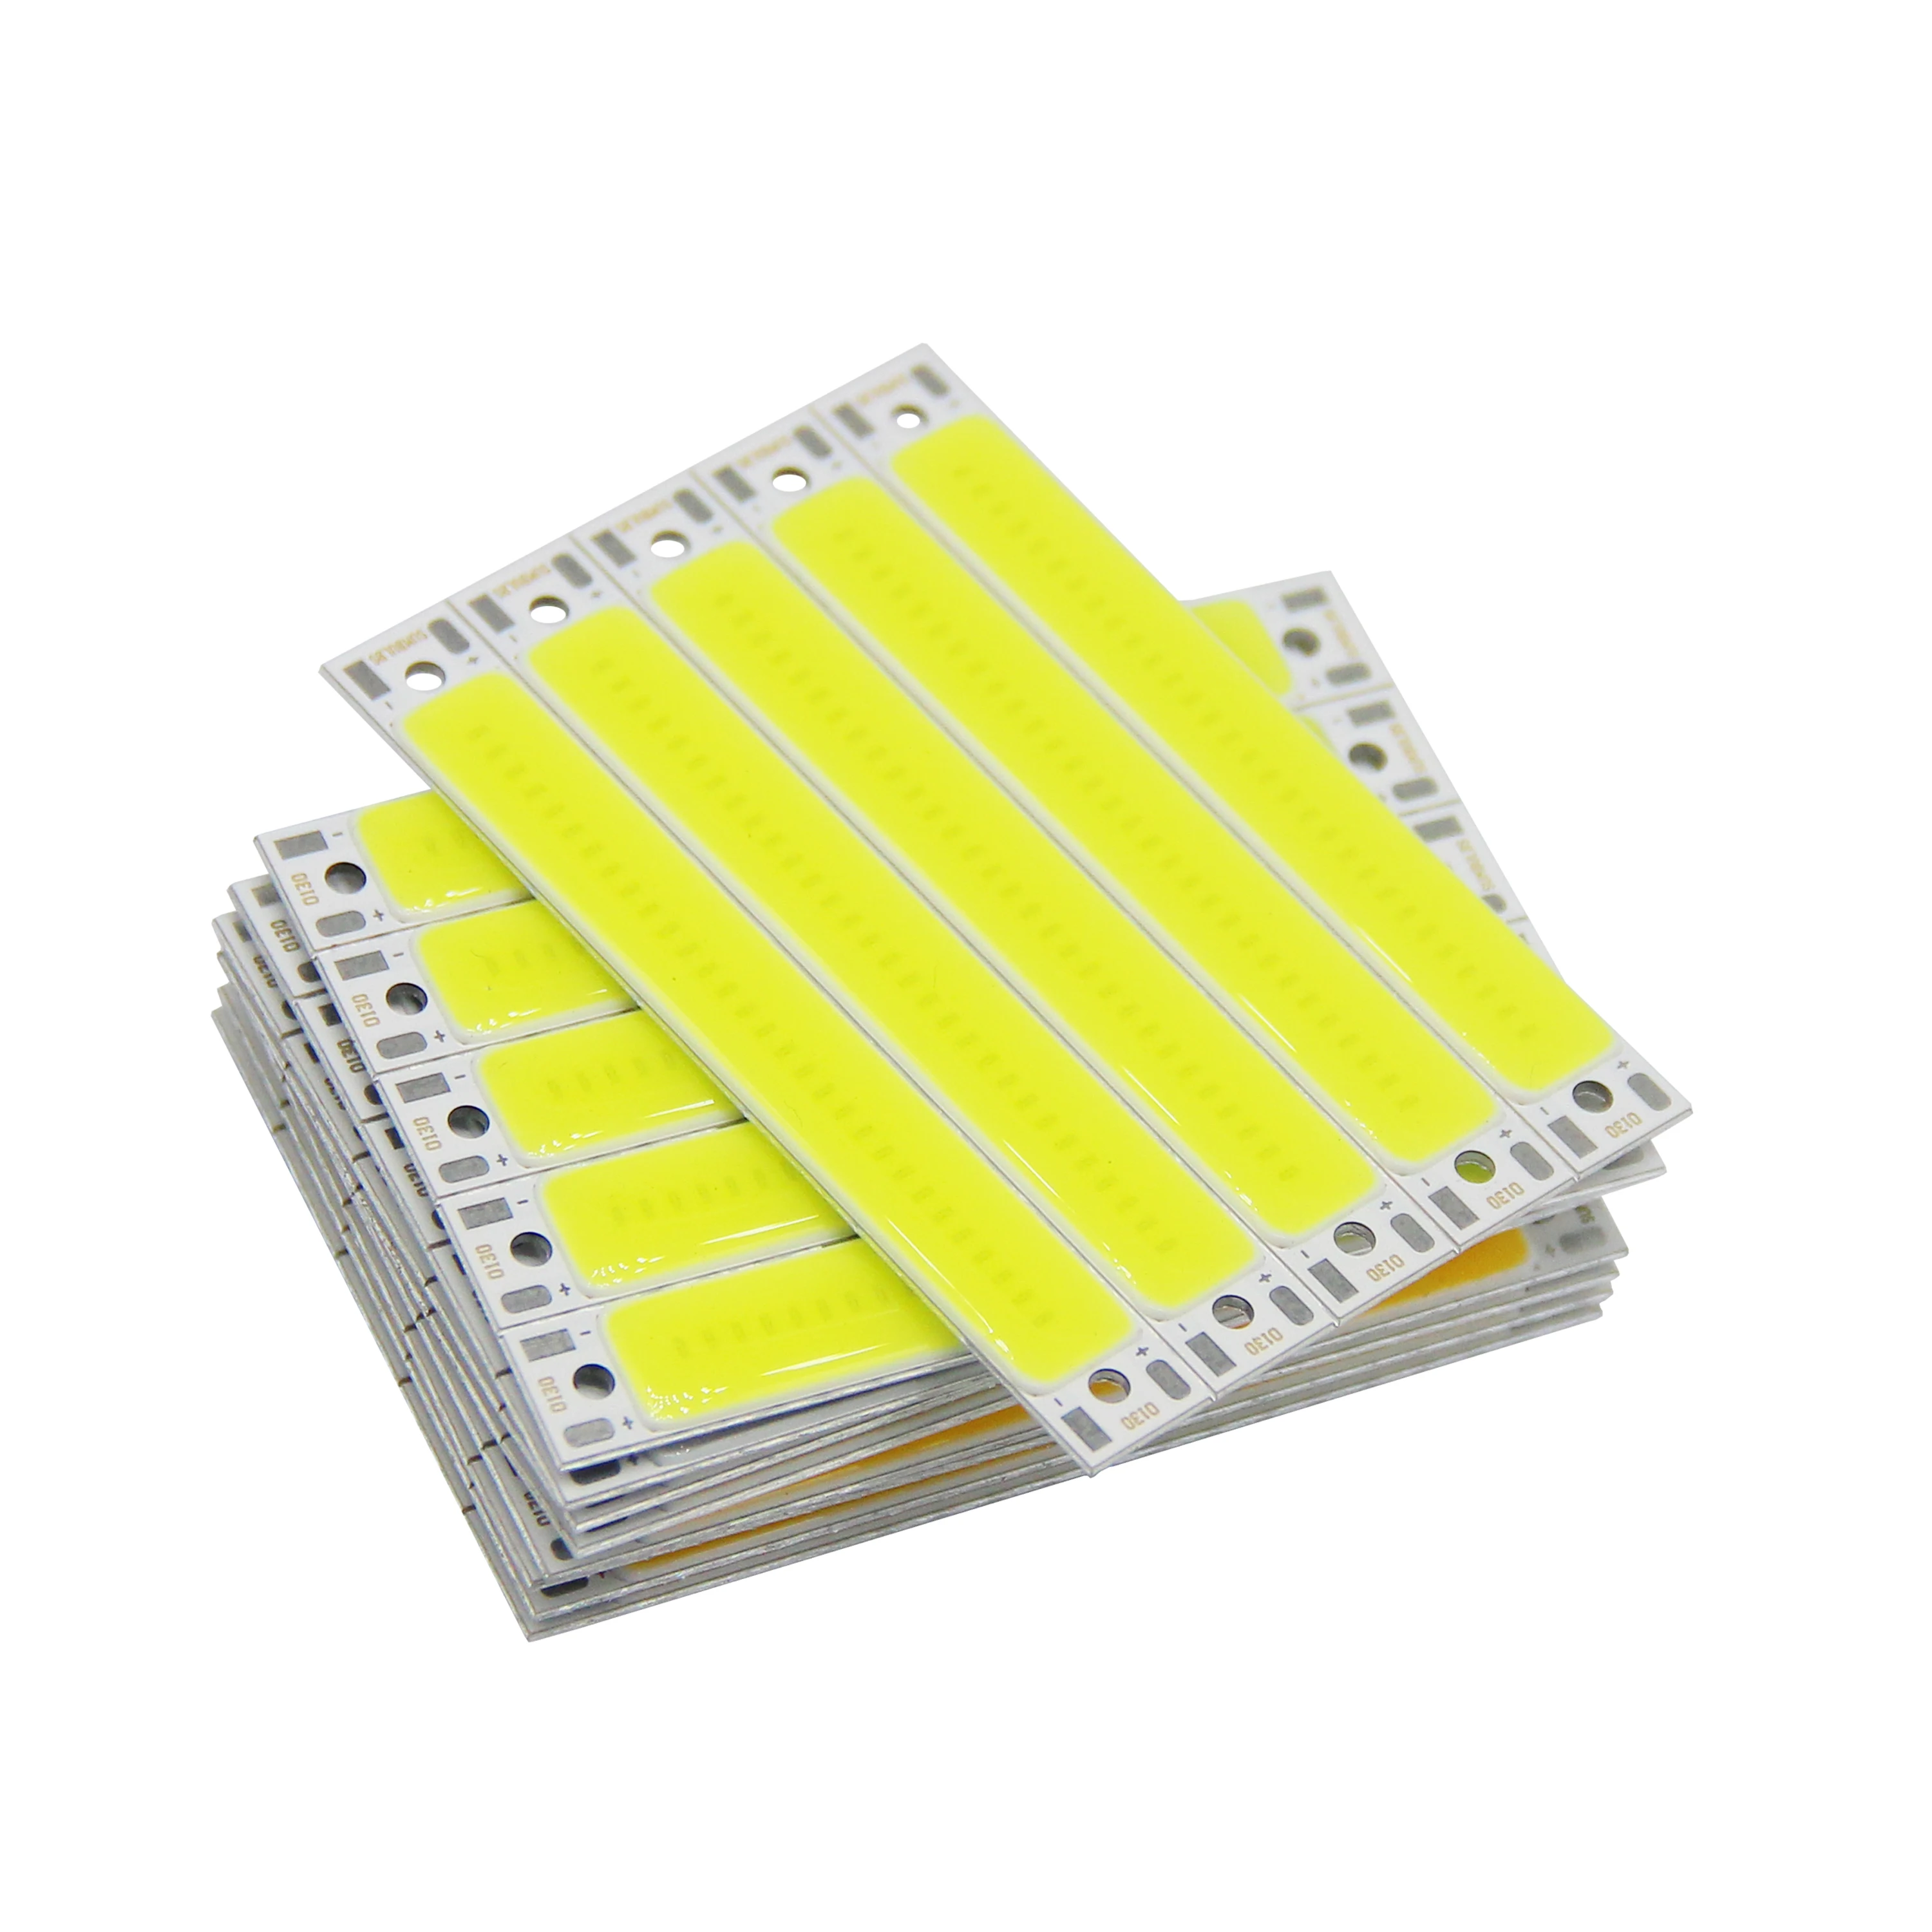 

10 Pieces 2V 3V LED COB 60x8mm Chip Onboard Warm Cool White Blue Red Bulb 1.5W 3W DC 3.7V For LED Strip Work Lamps Bicycle Light